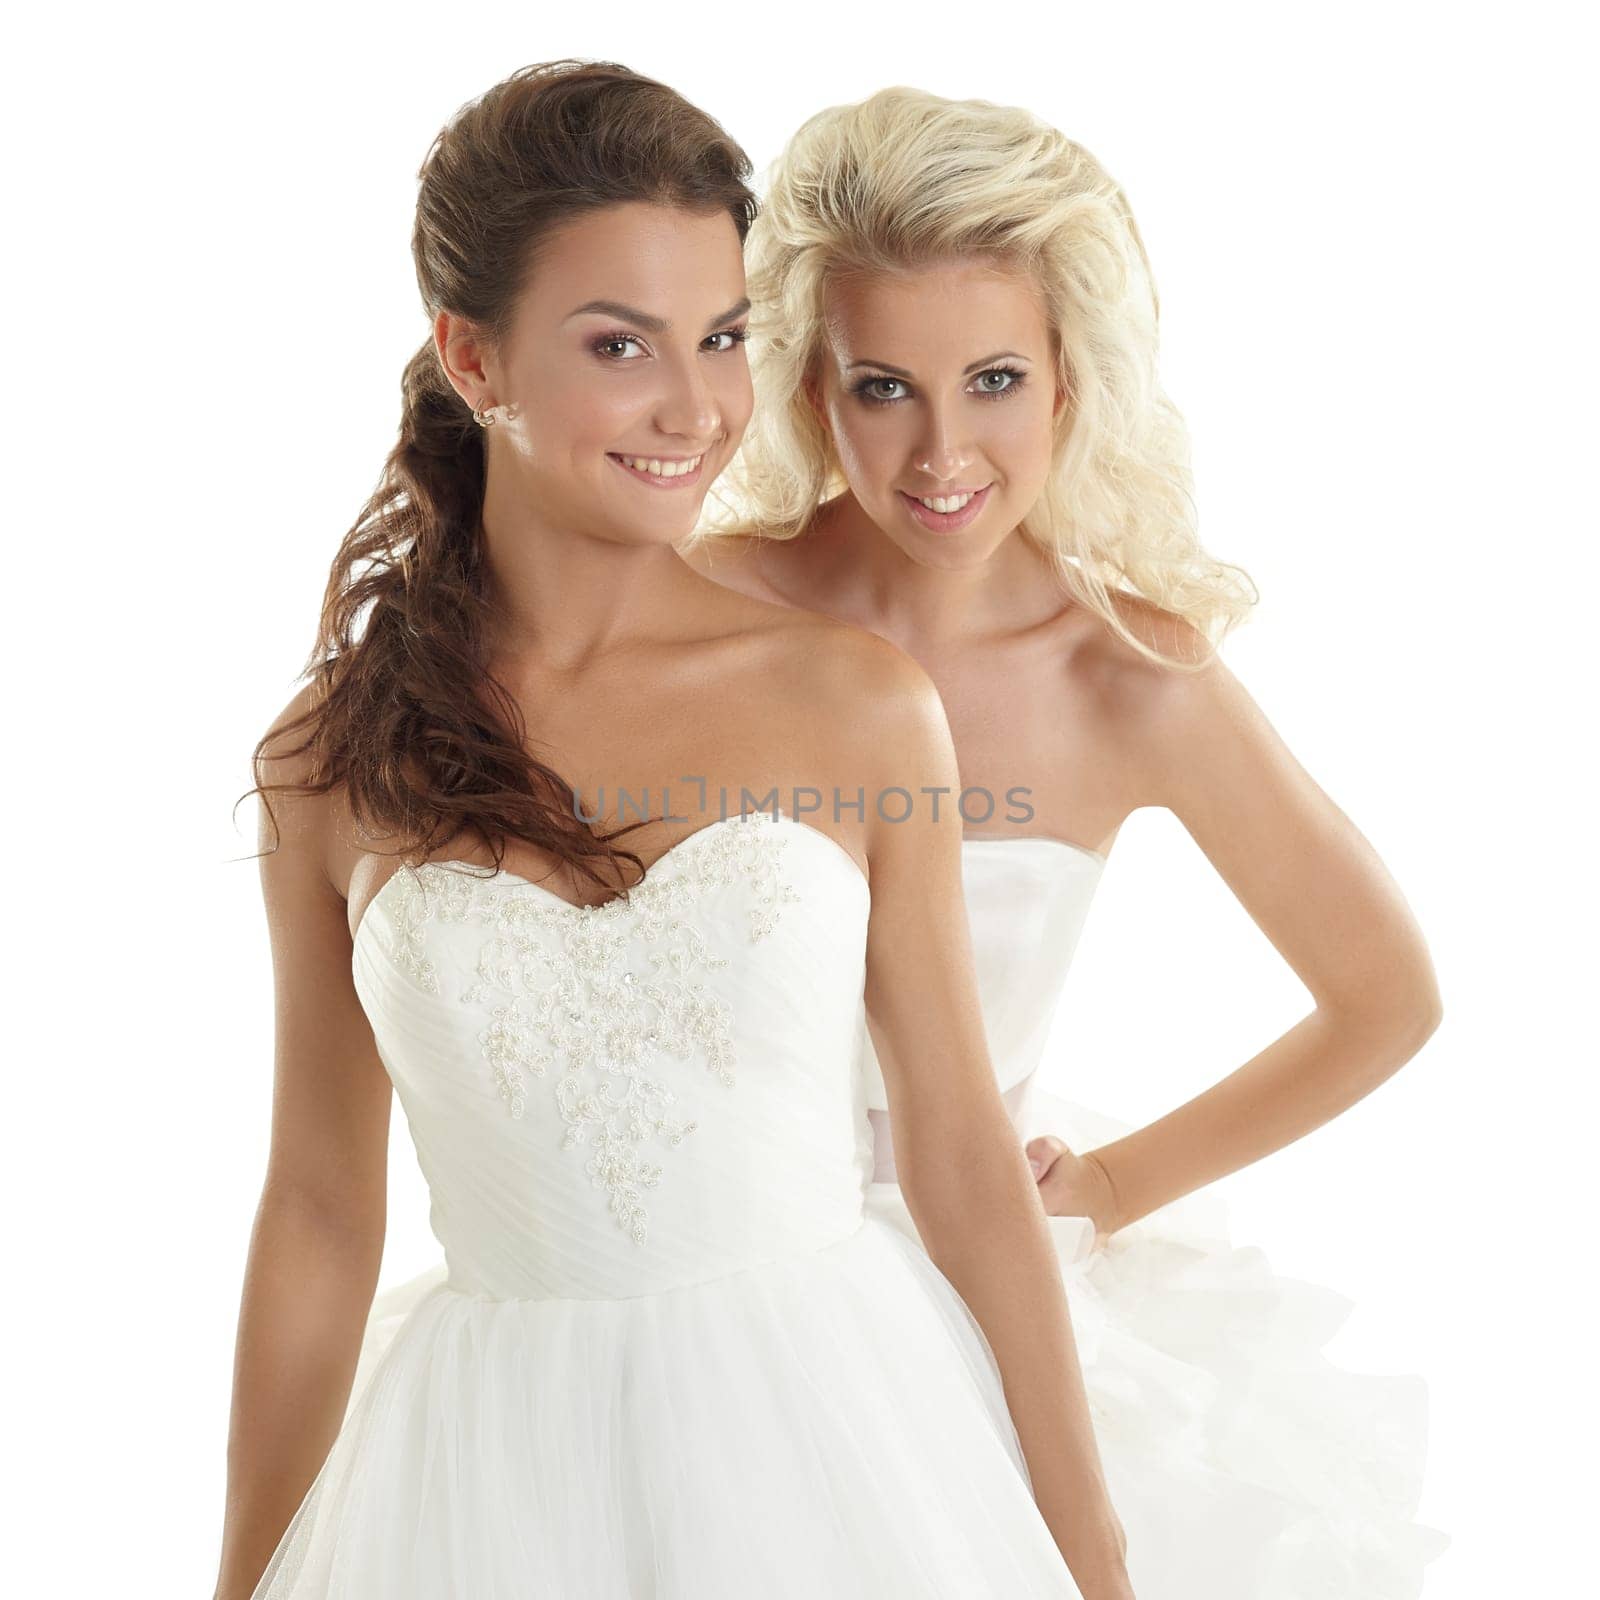 Charming models posing in wedding dresses by rivertime